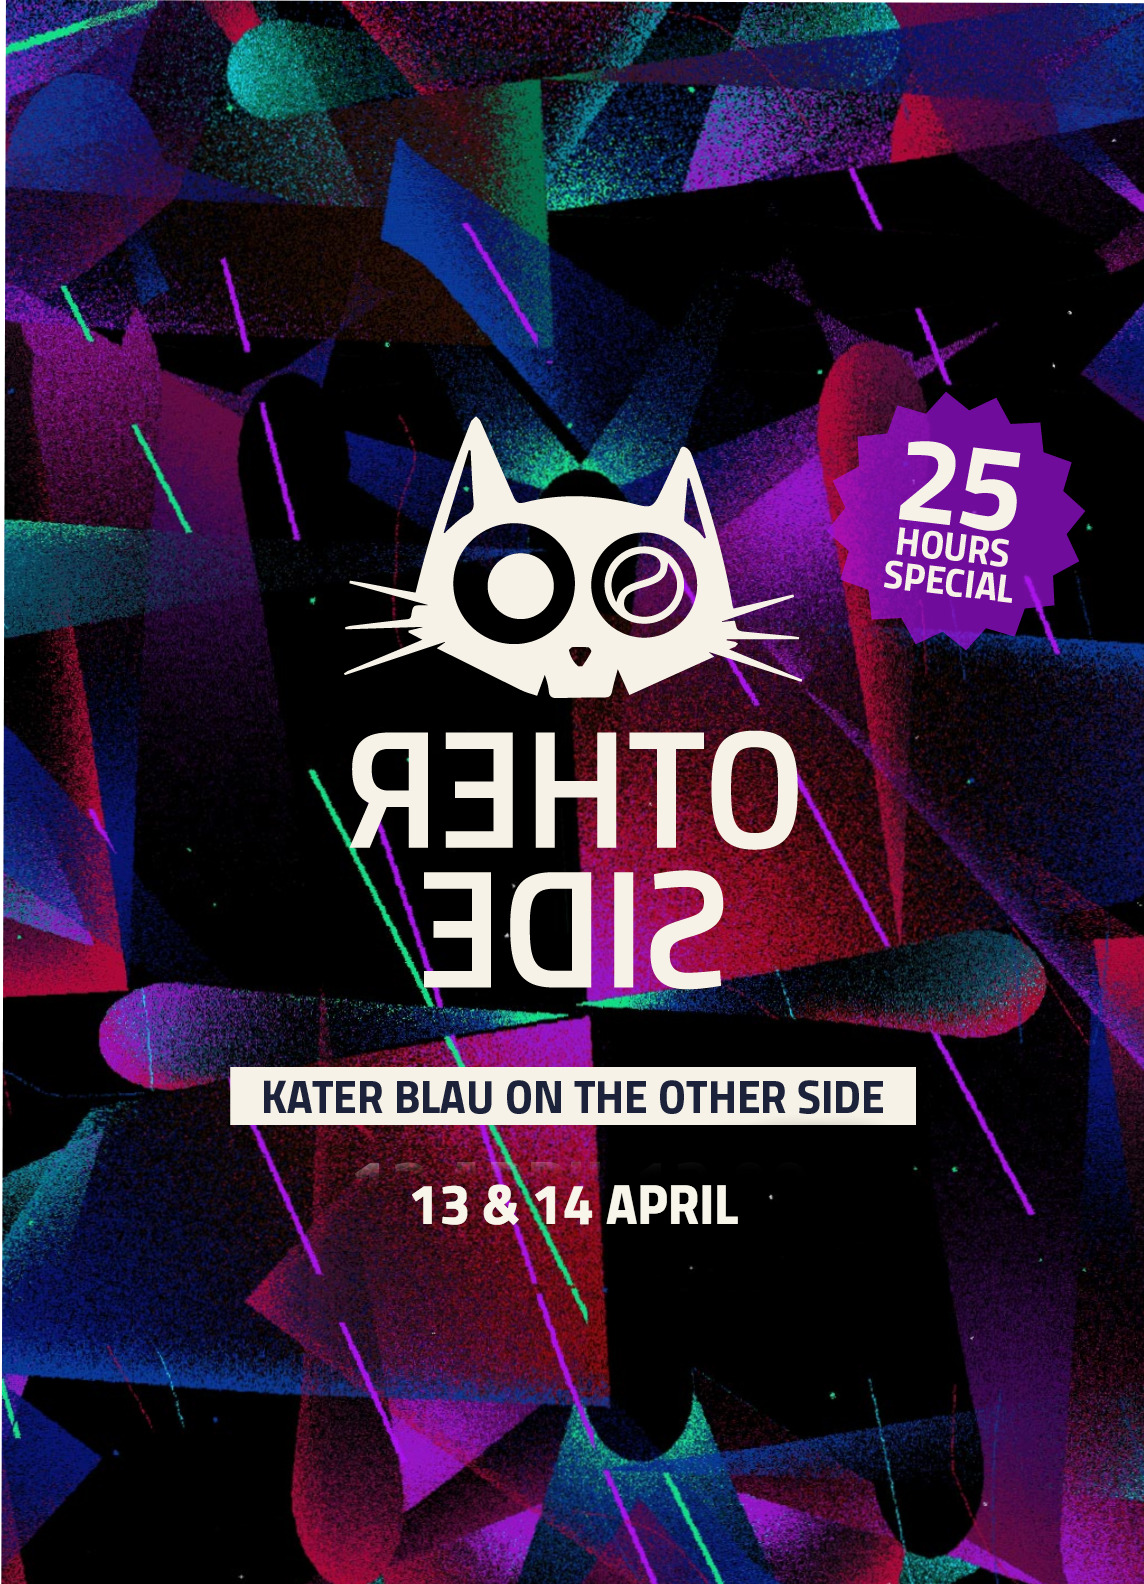 Kater Blau on THE OTHER SIDE // 25 hours special - Página trasera